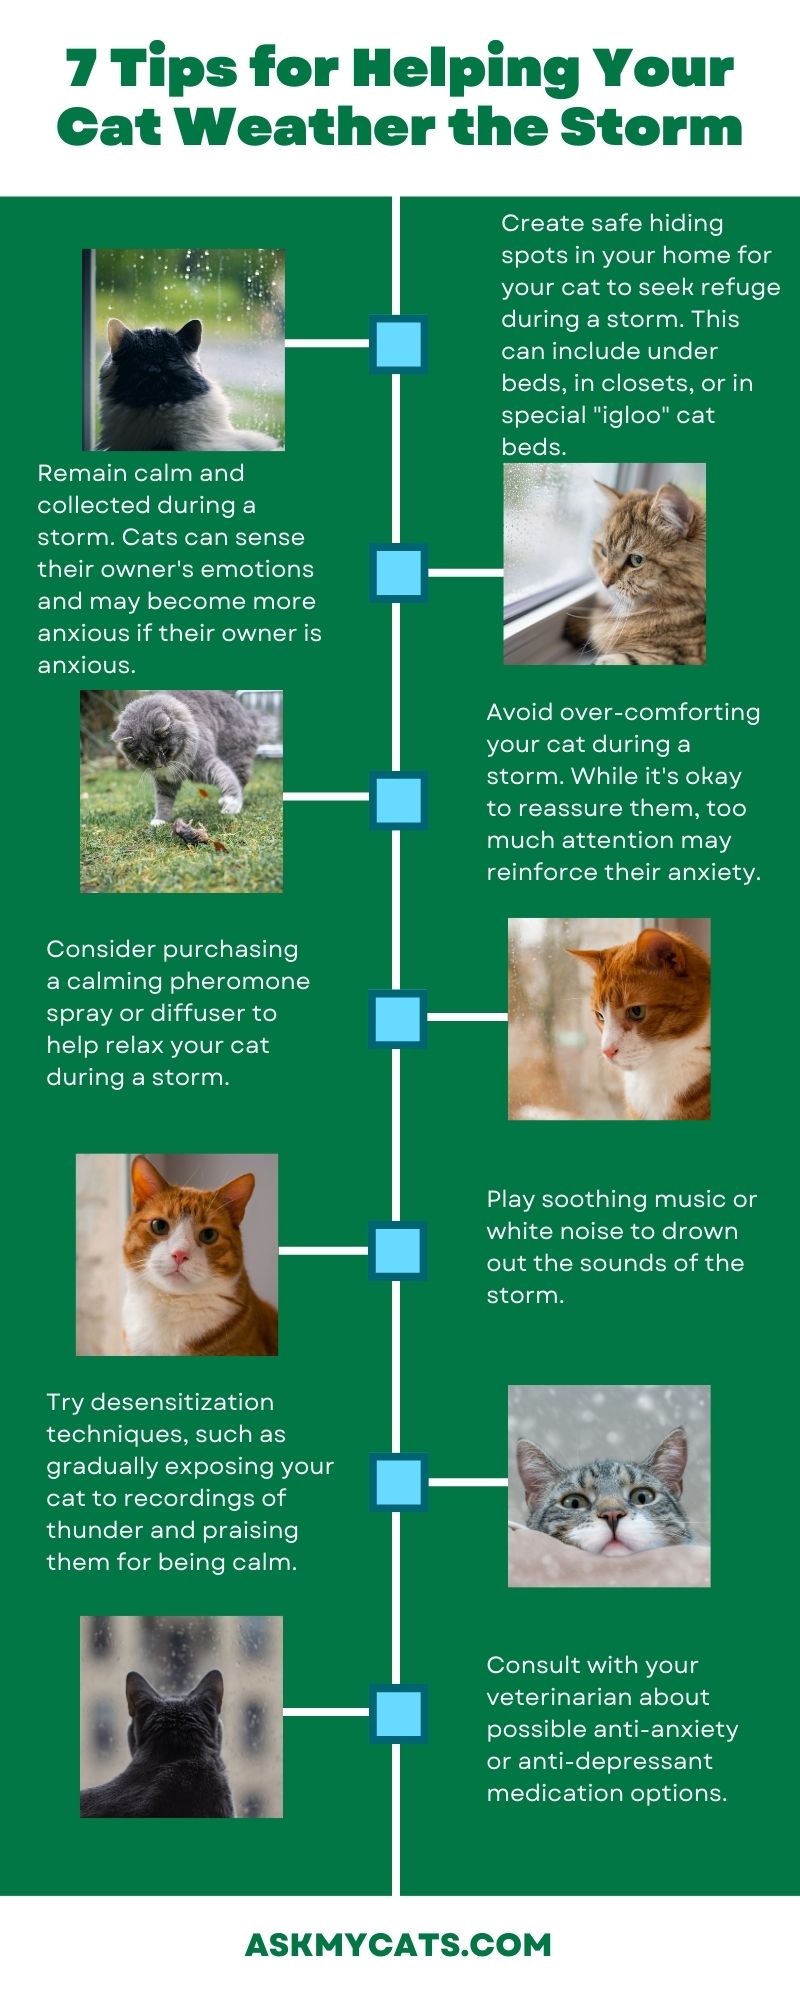 Are Cats Scared Of Thunder & Lightning?